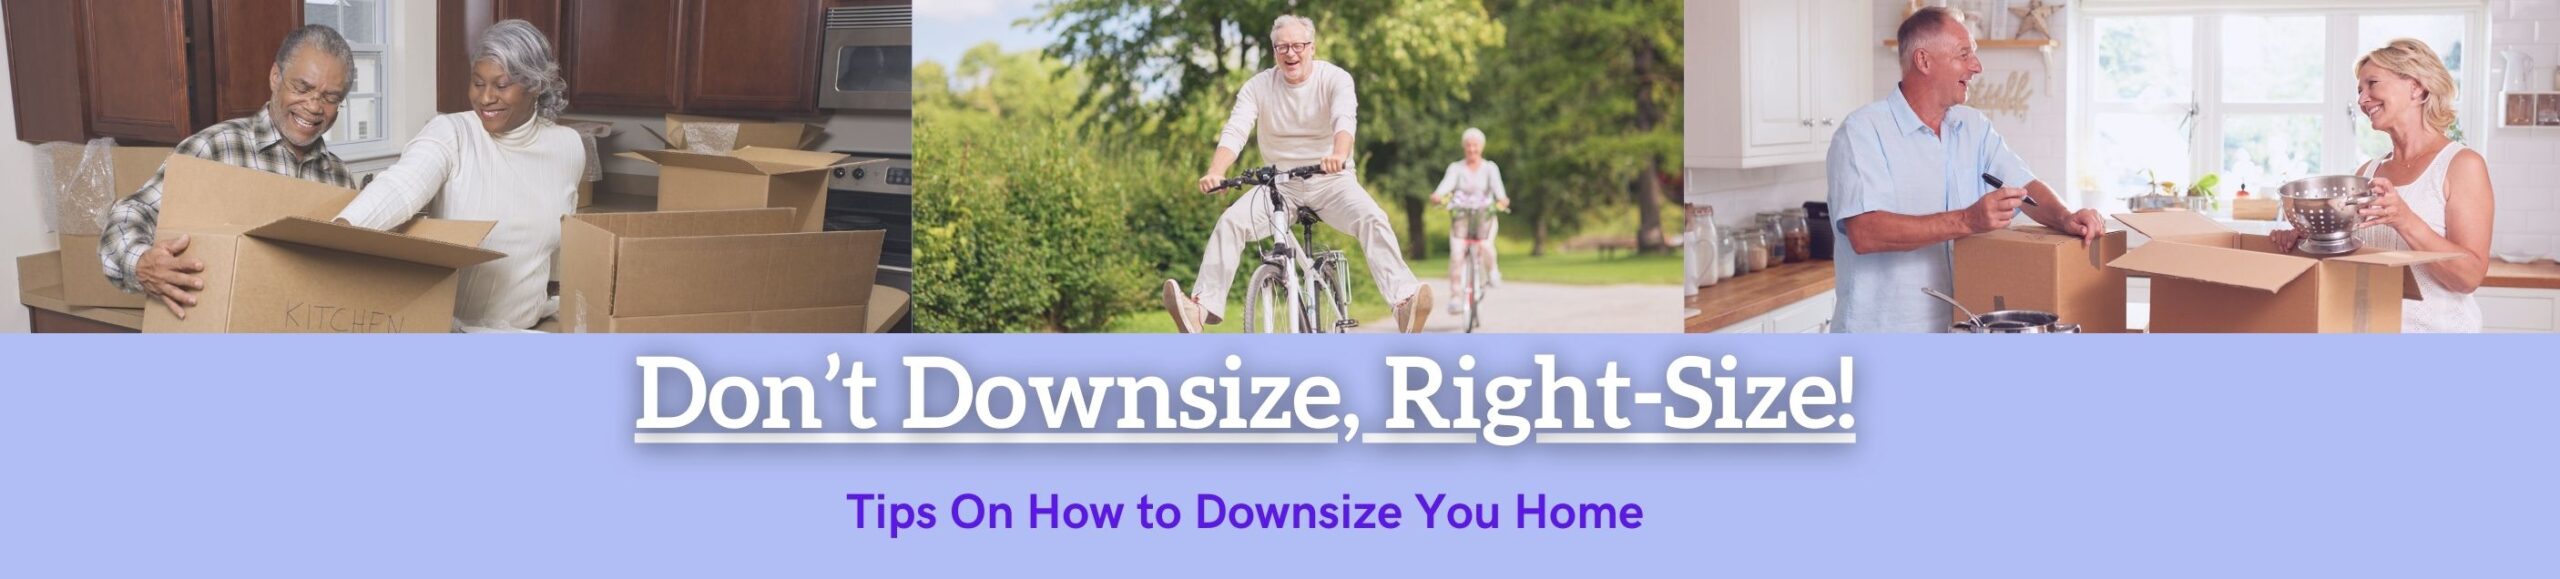 Don't Downsize, Right-Size